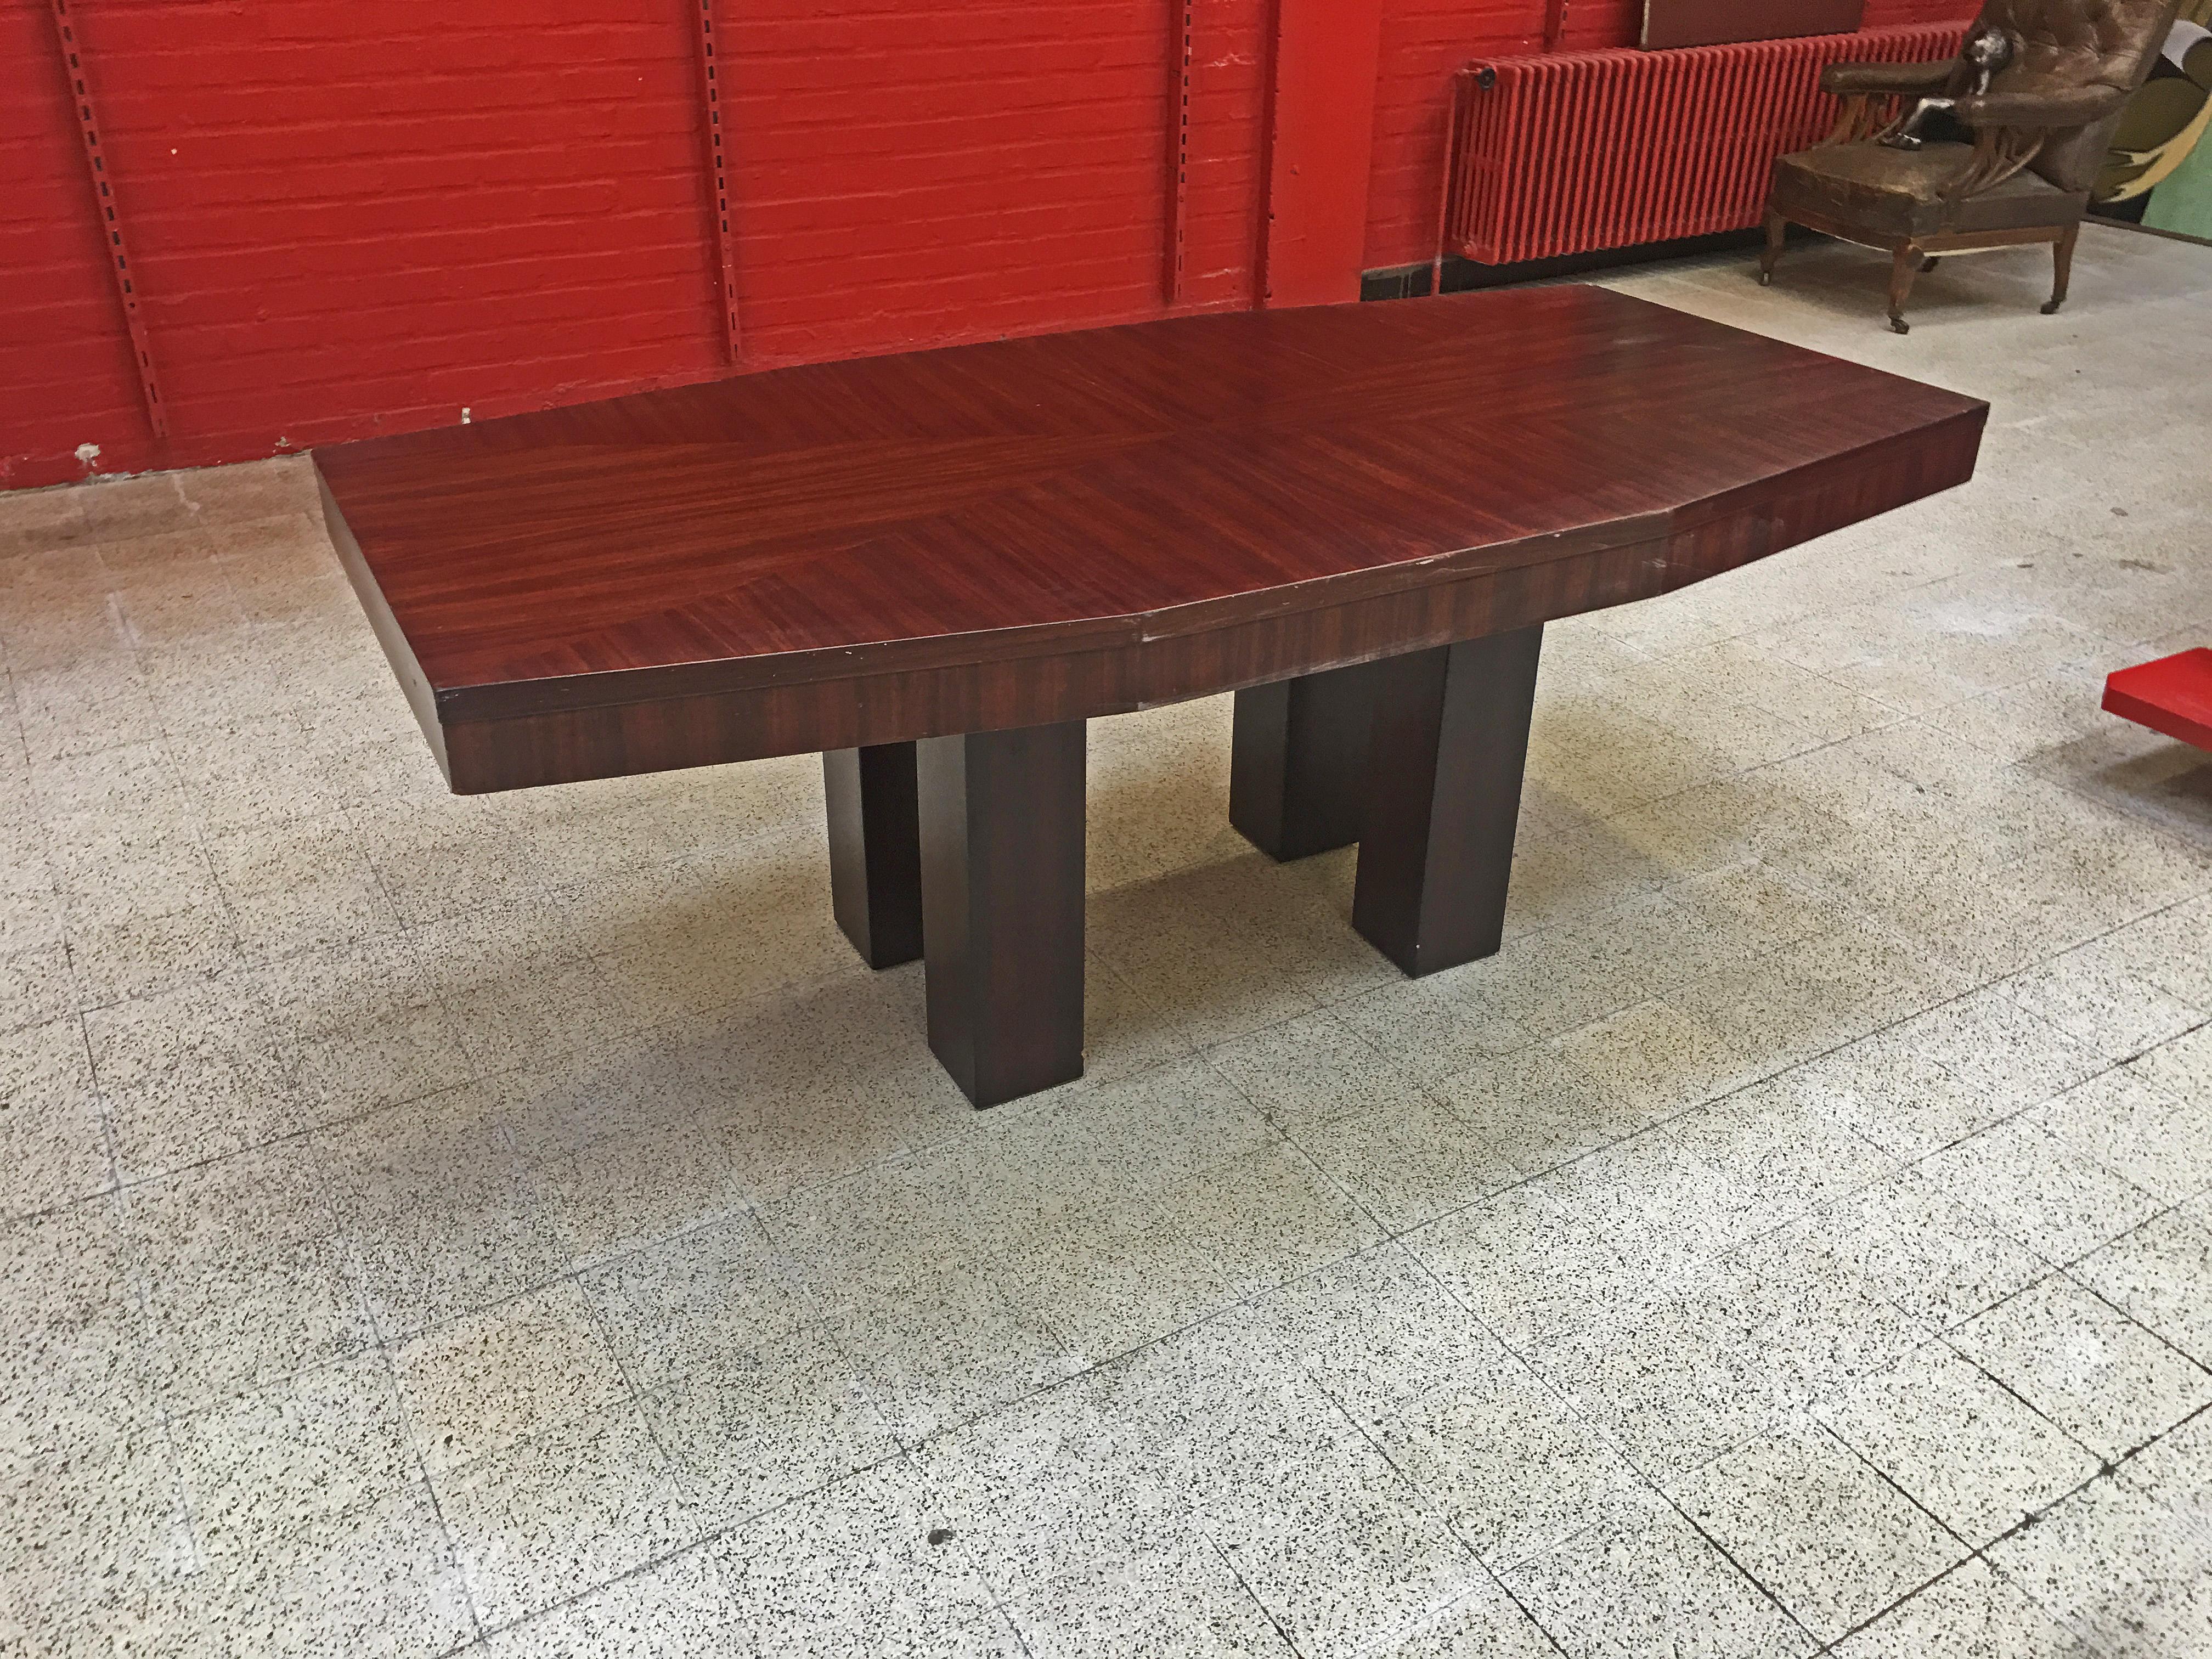 Modernist Art Deco Table circa 1930-1940 Attributed to Jacques Adnet For Sale 2